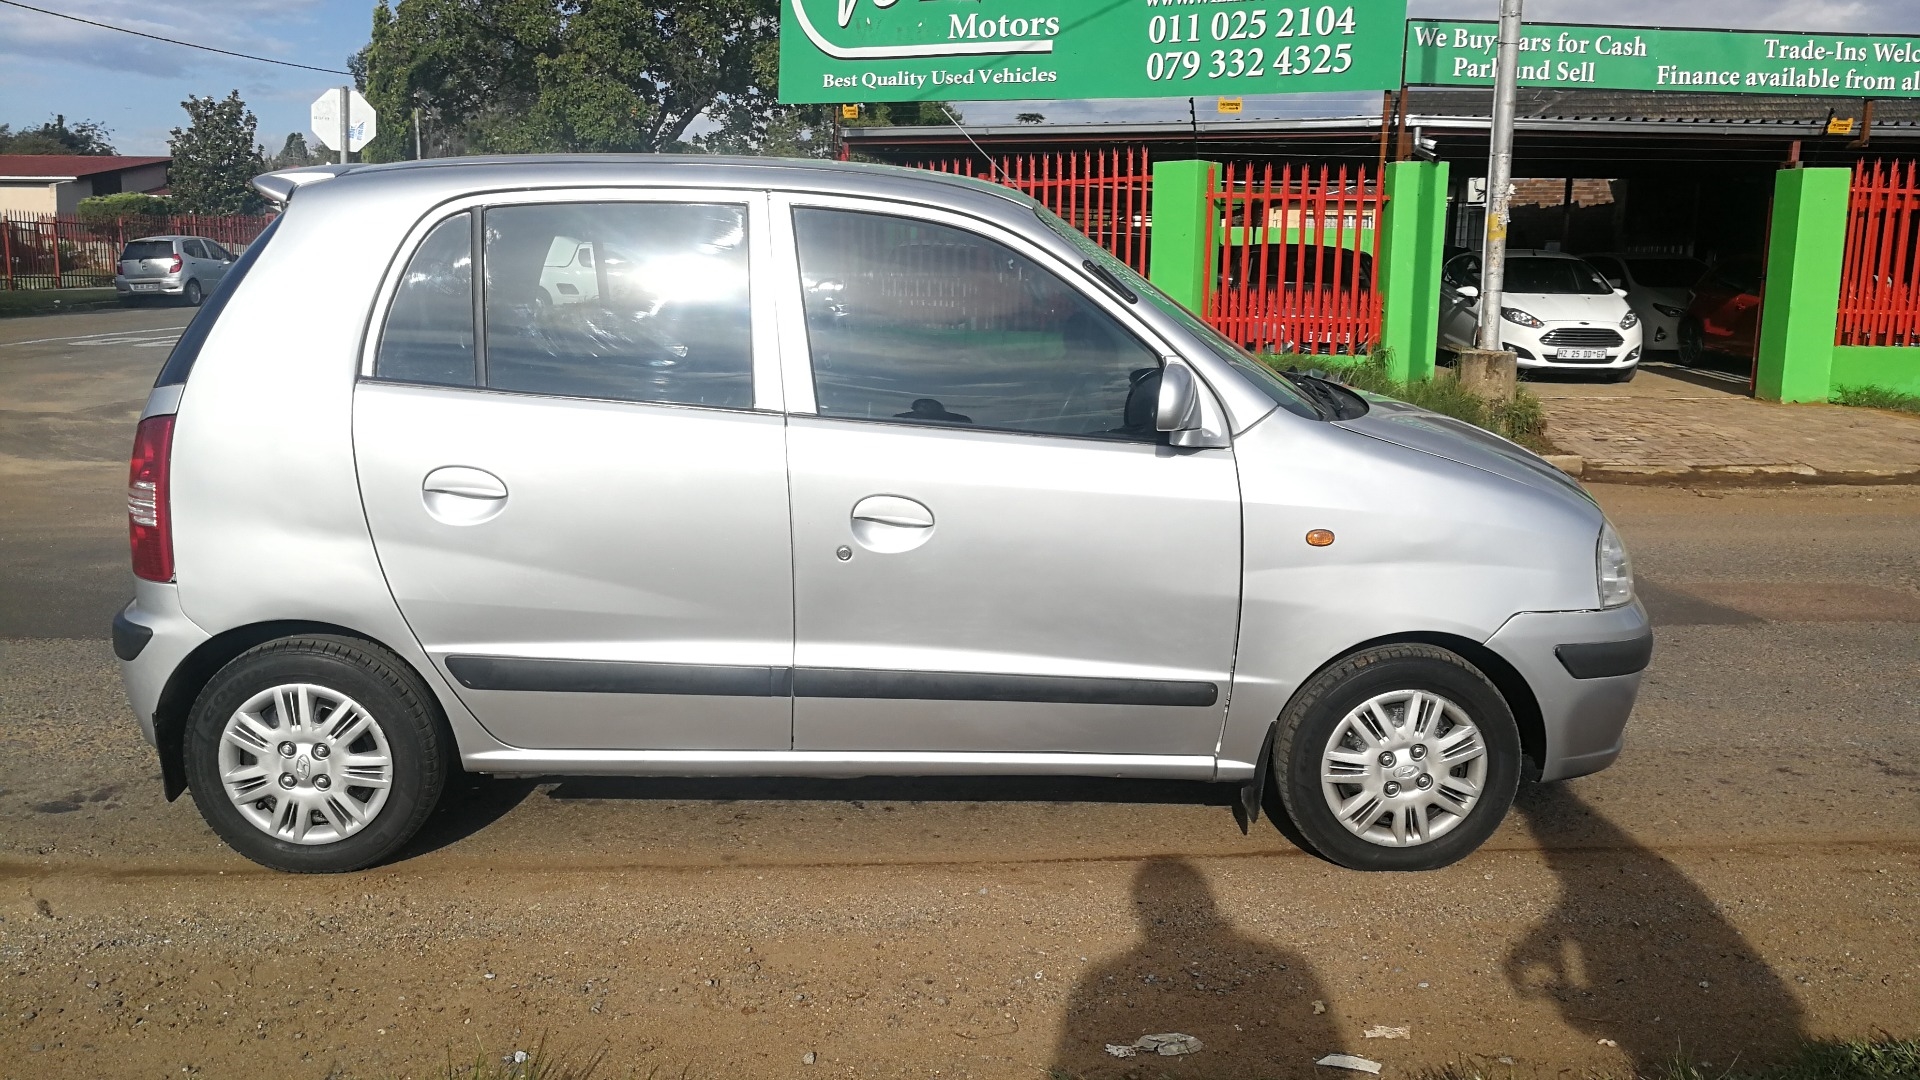 Hyundai Atos Prime 1.1 GLS automatic for sale in Gauteng